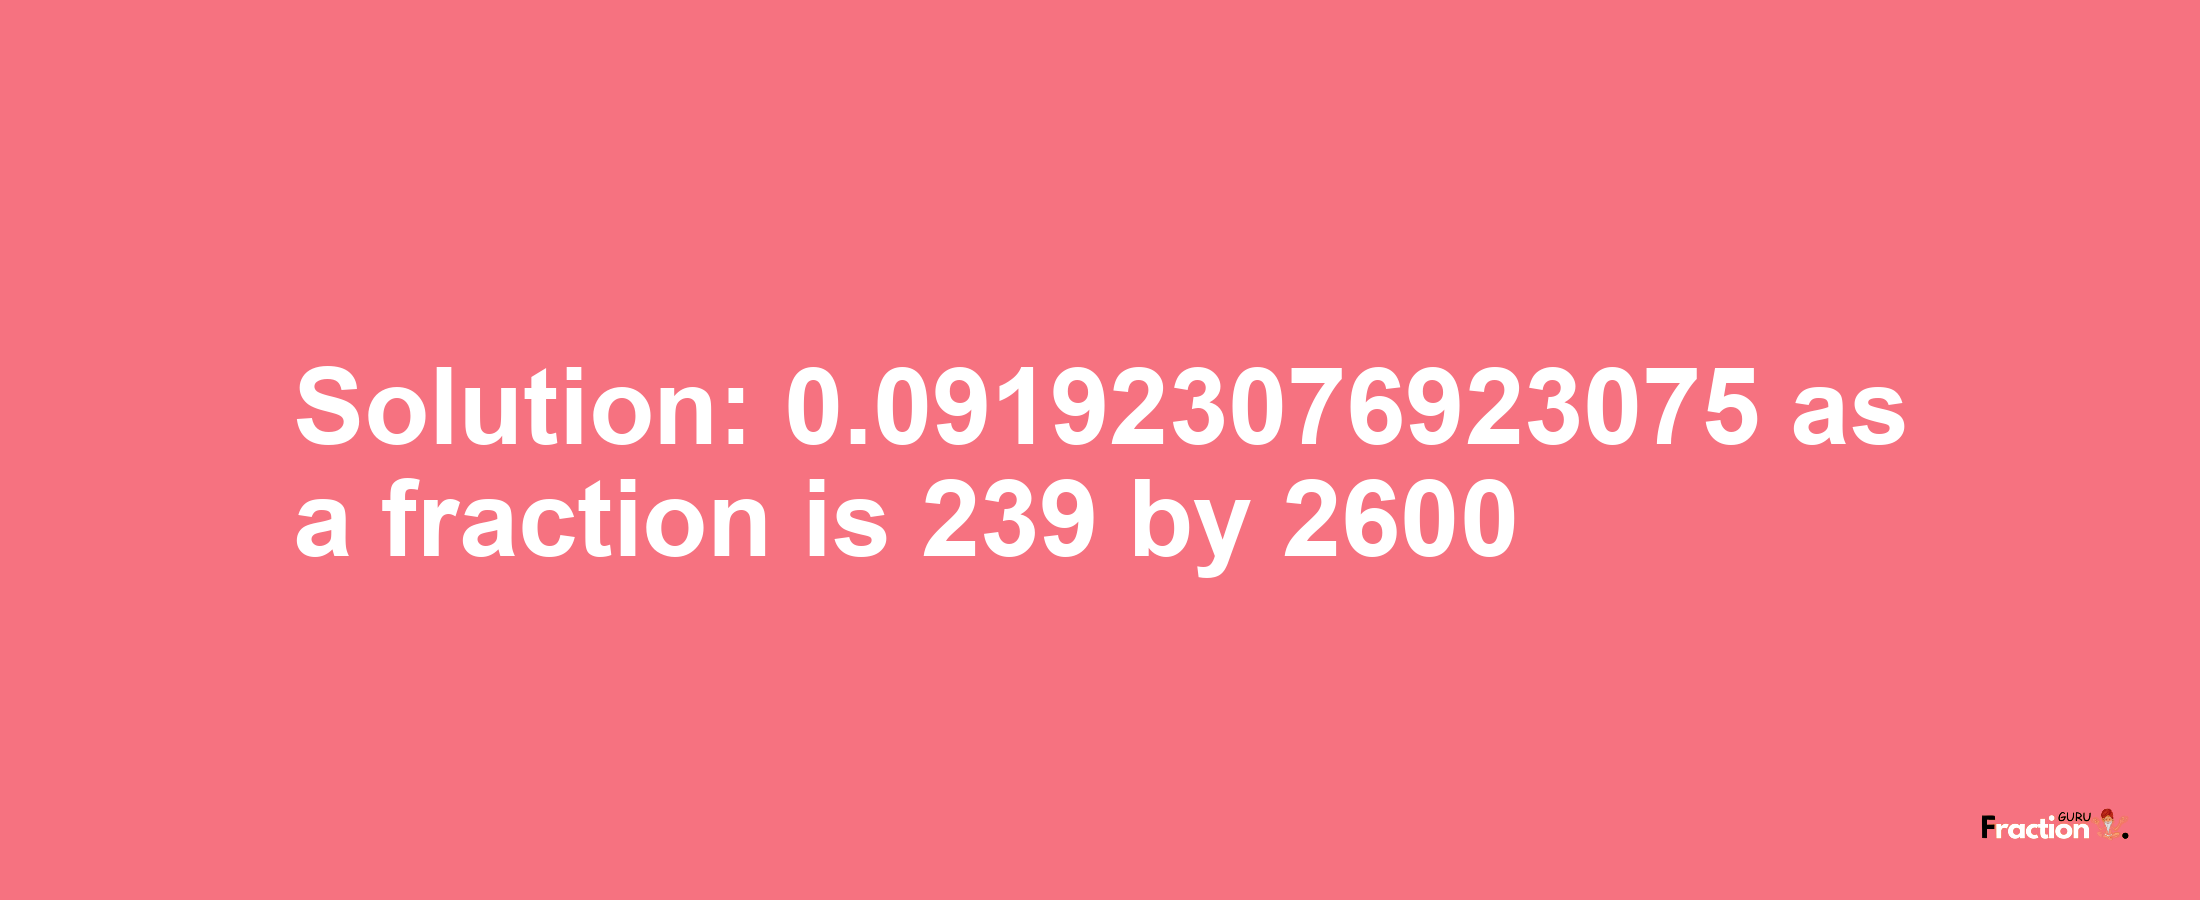 Solution:0.091923076923075 as a fraction is 239/2600